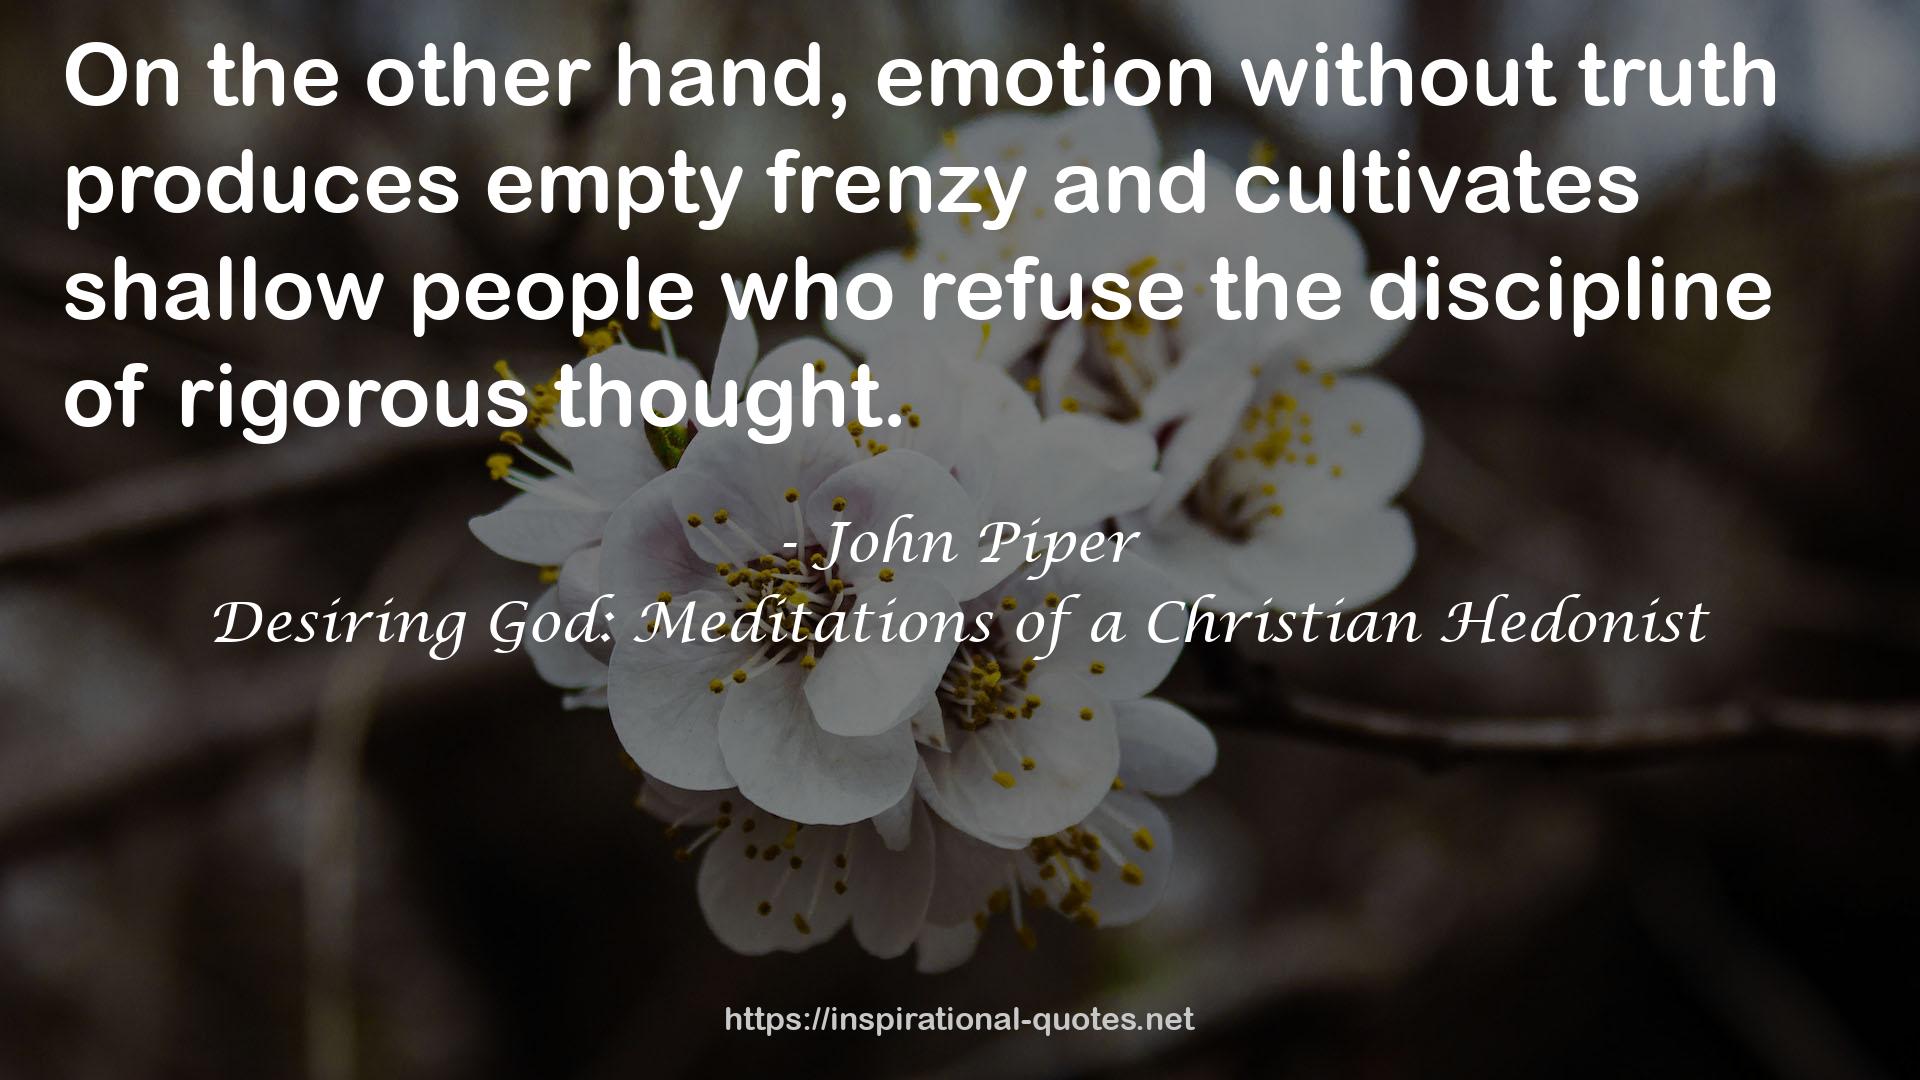 Desiring God: Meditations of a Christian Hedonist QUOTES